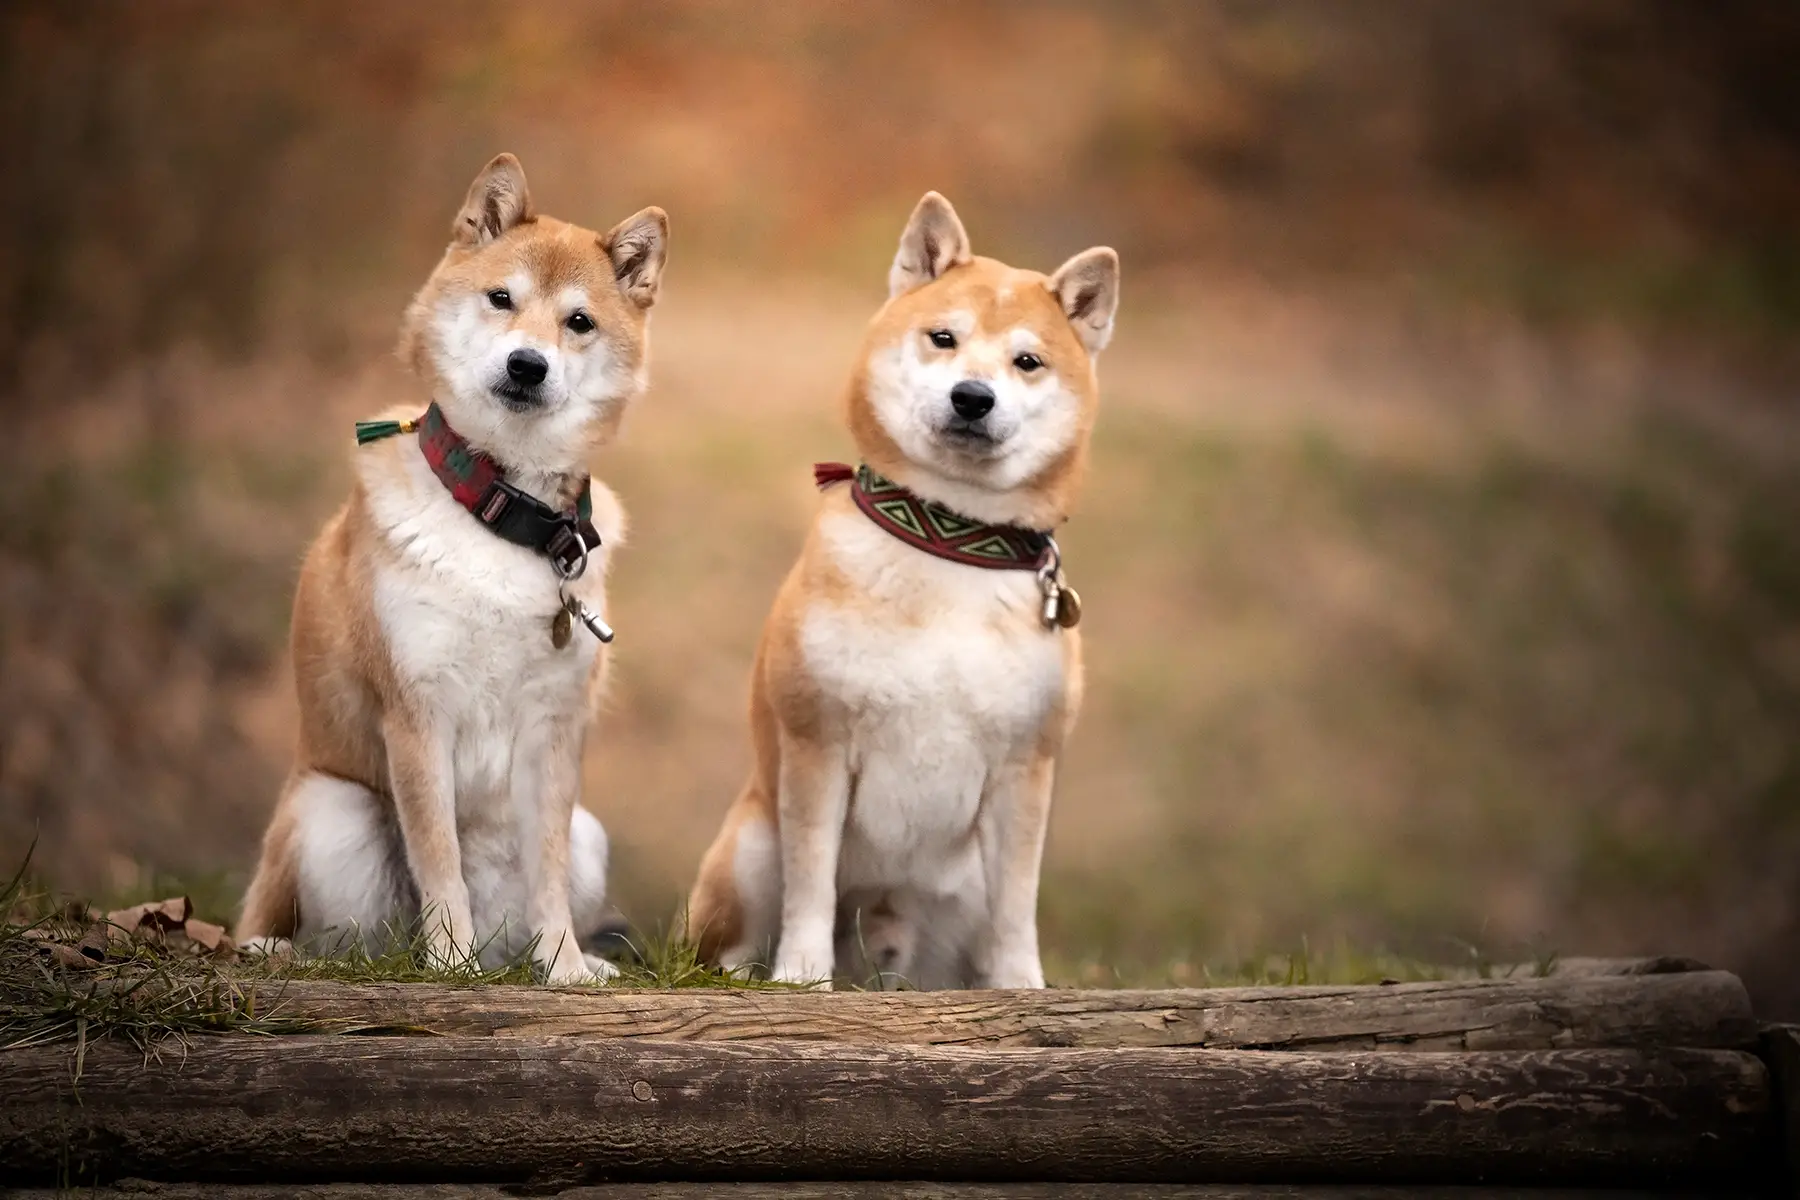 Two shiba inu dogs sit side by side and stare curiously into the lens. Outdoor photo